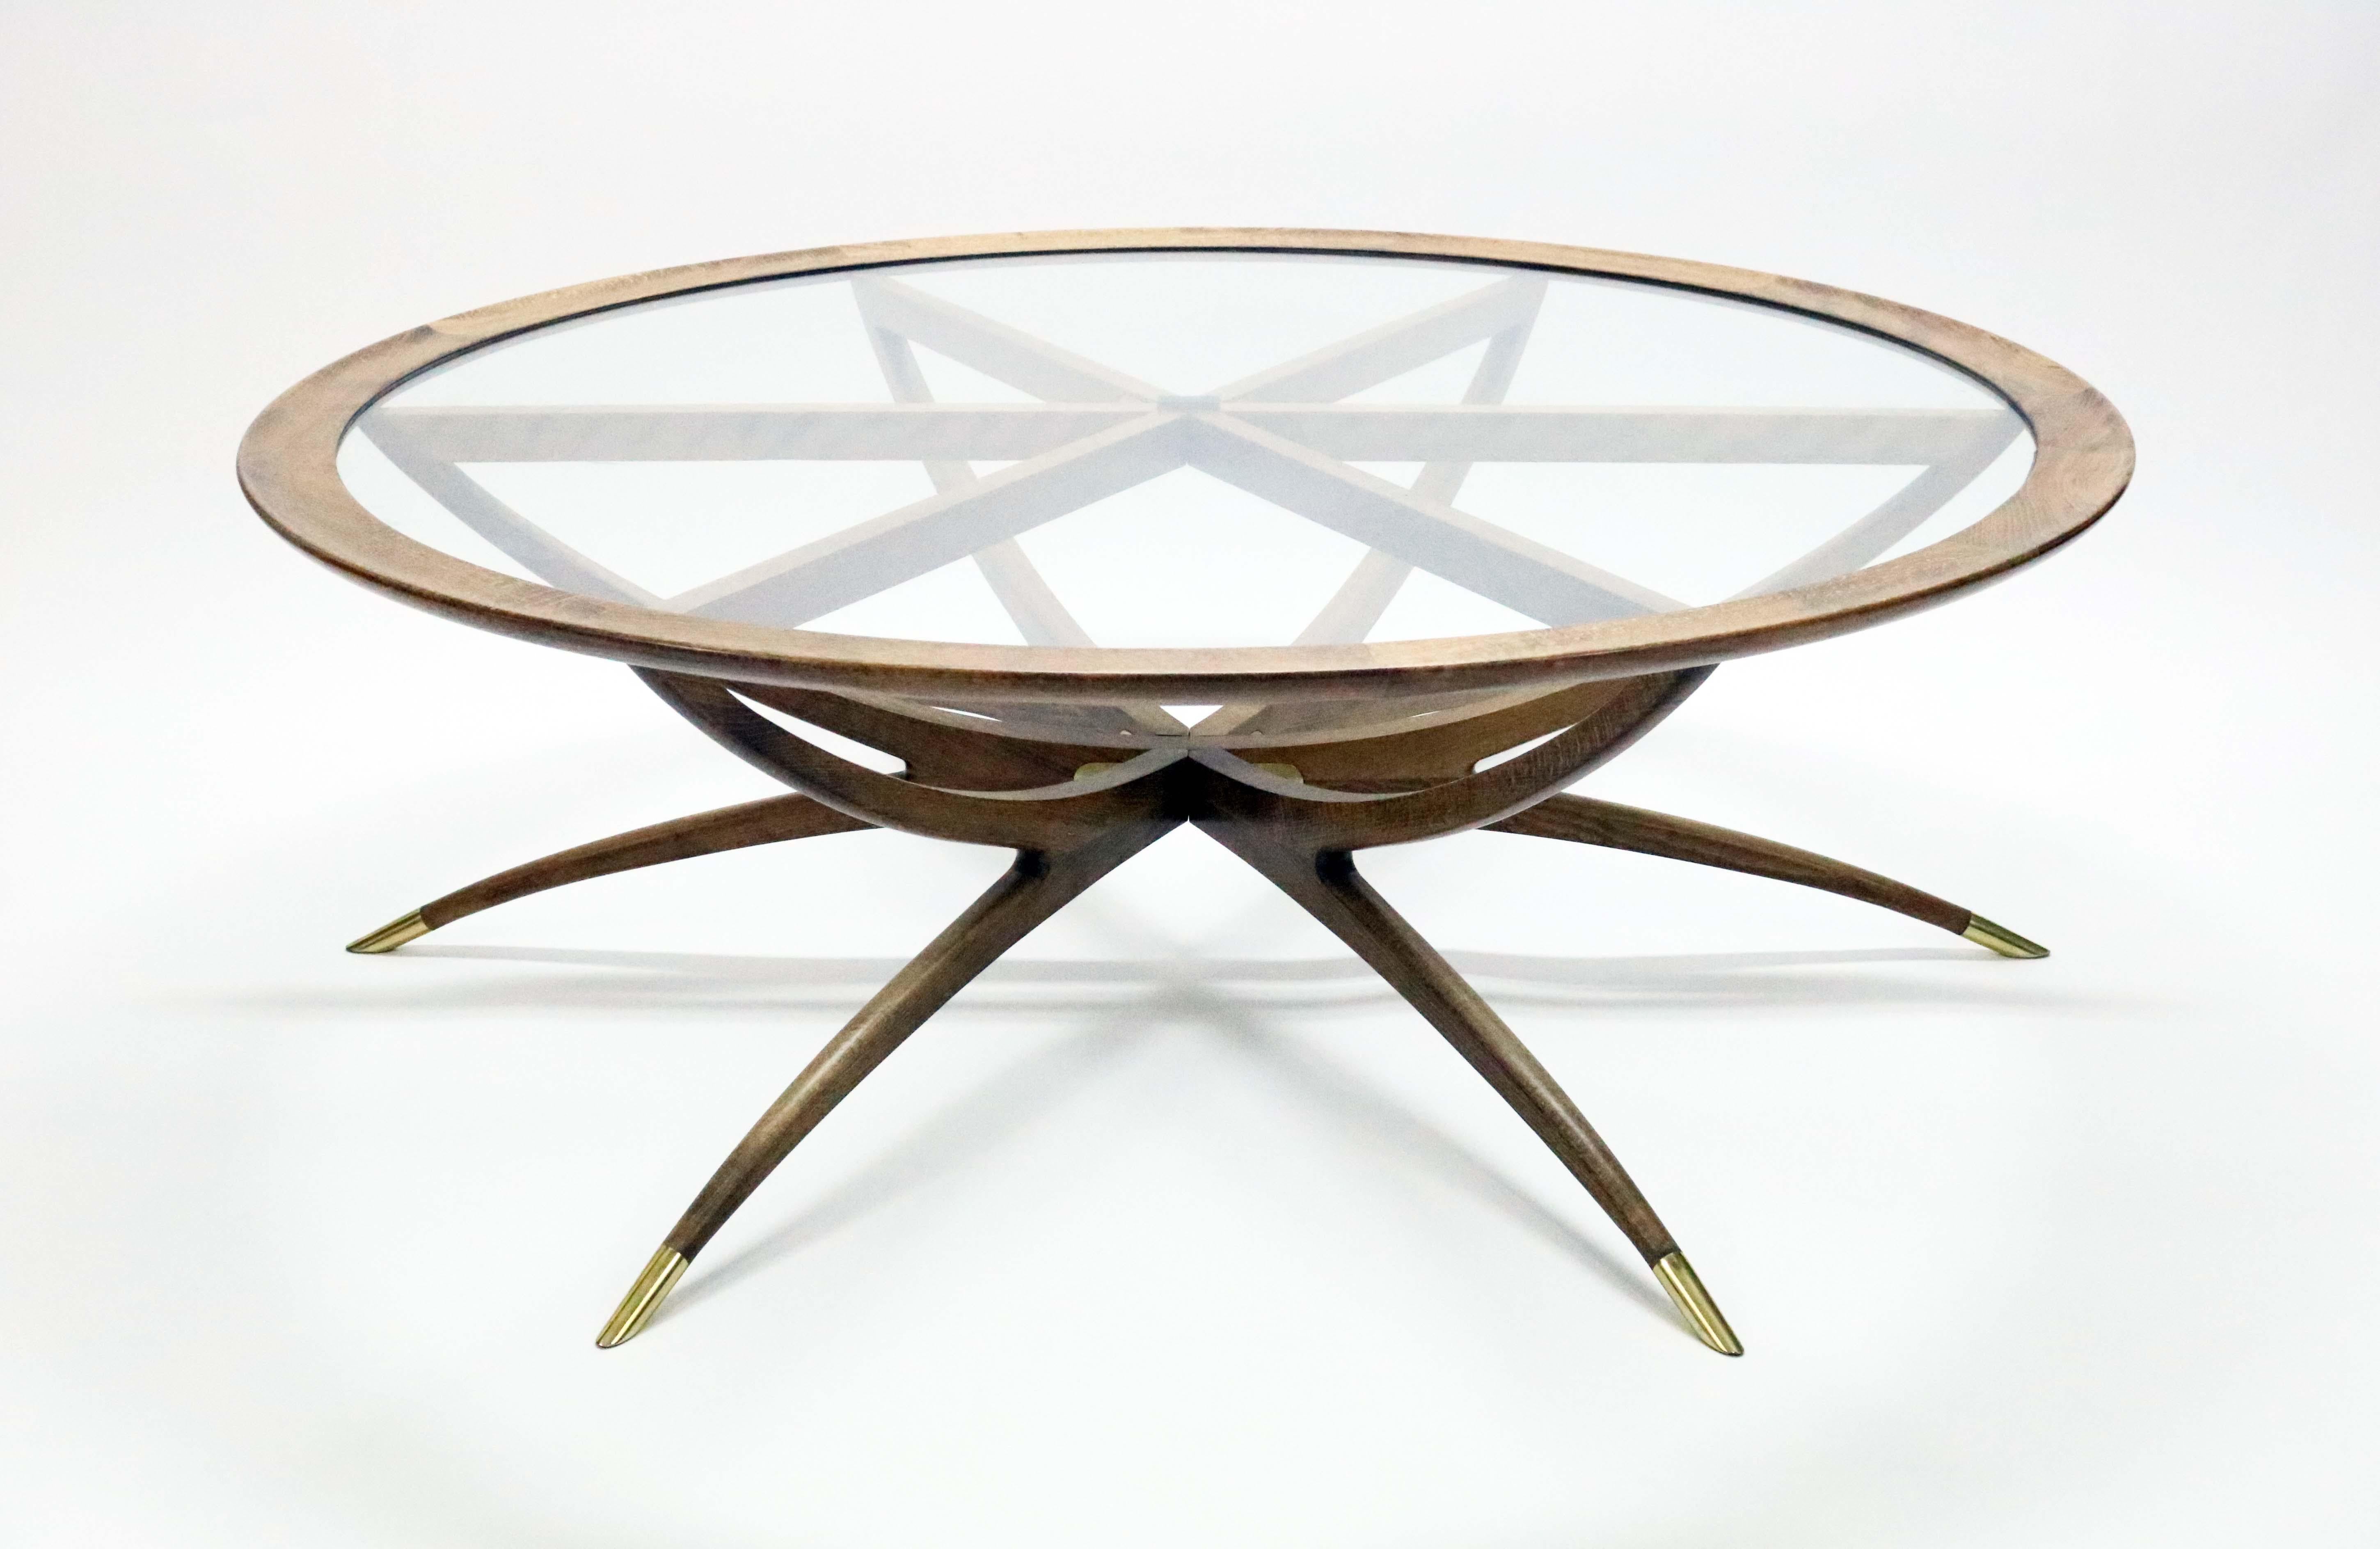 A captivating mahogany spider leg coffee table in the style of Carlo de Carli.

The glass top lifts off, and the base folds flat for storage or ease in moving.

Recently professionally refinished.